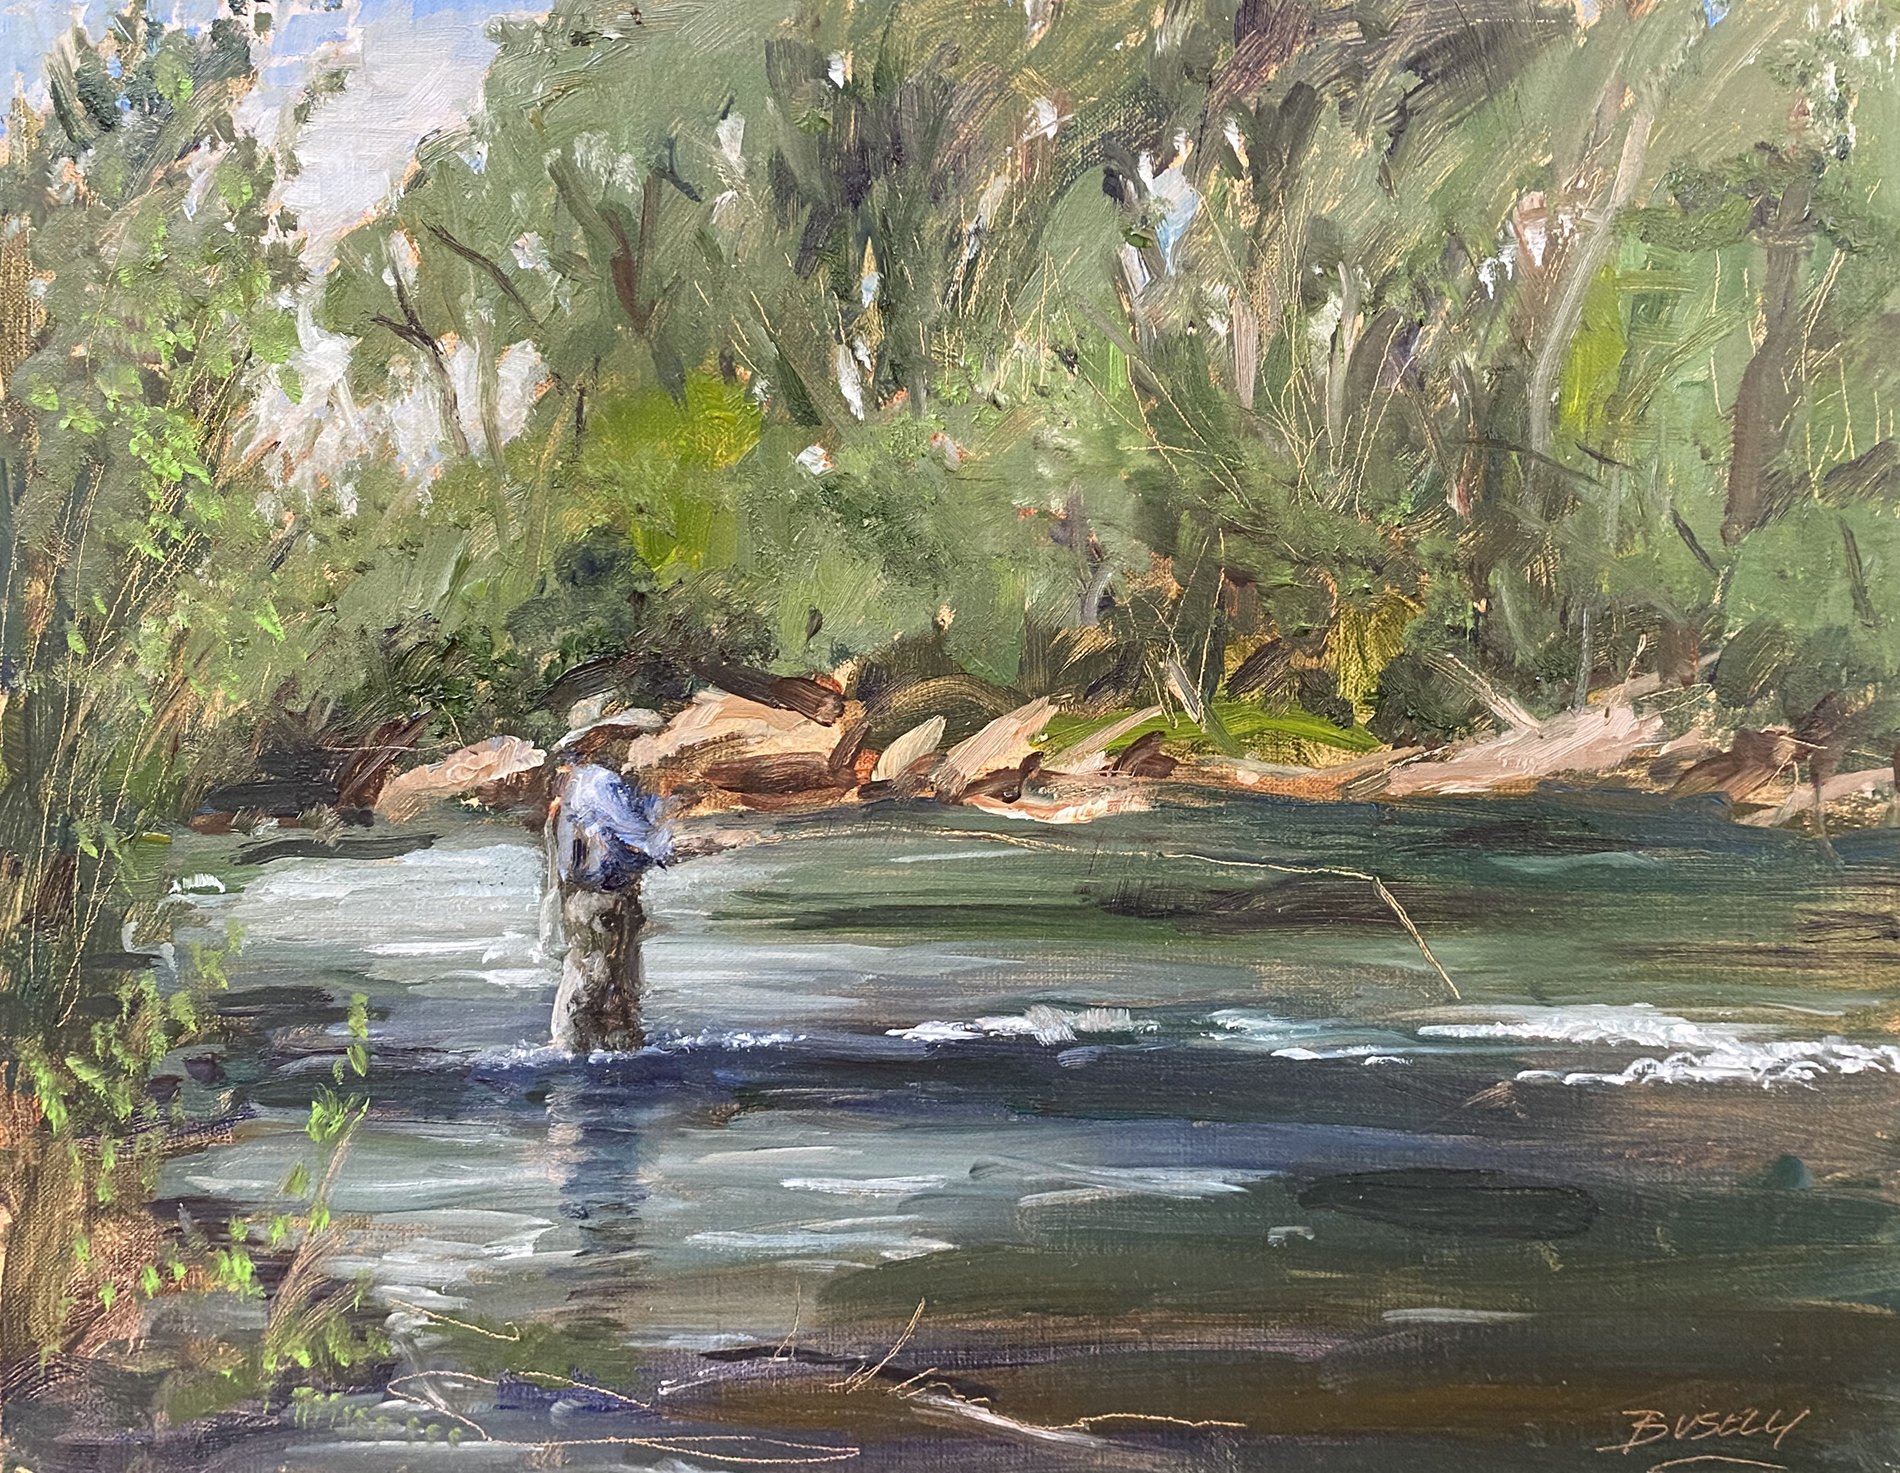 " Fly Fishing on the Pecos, NM"